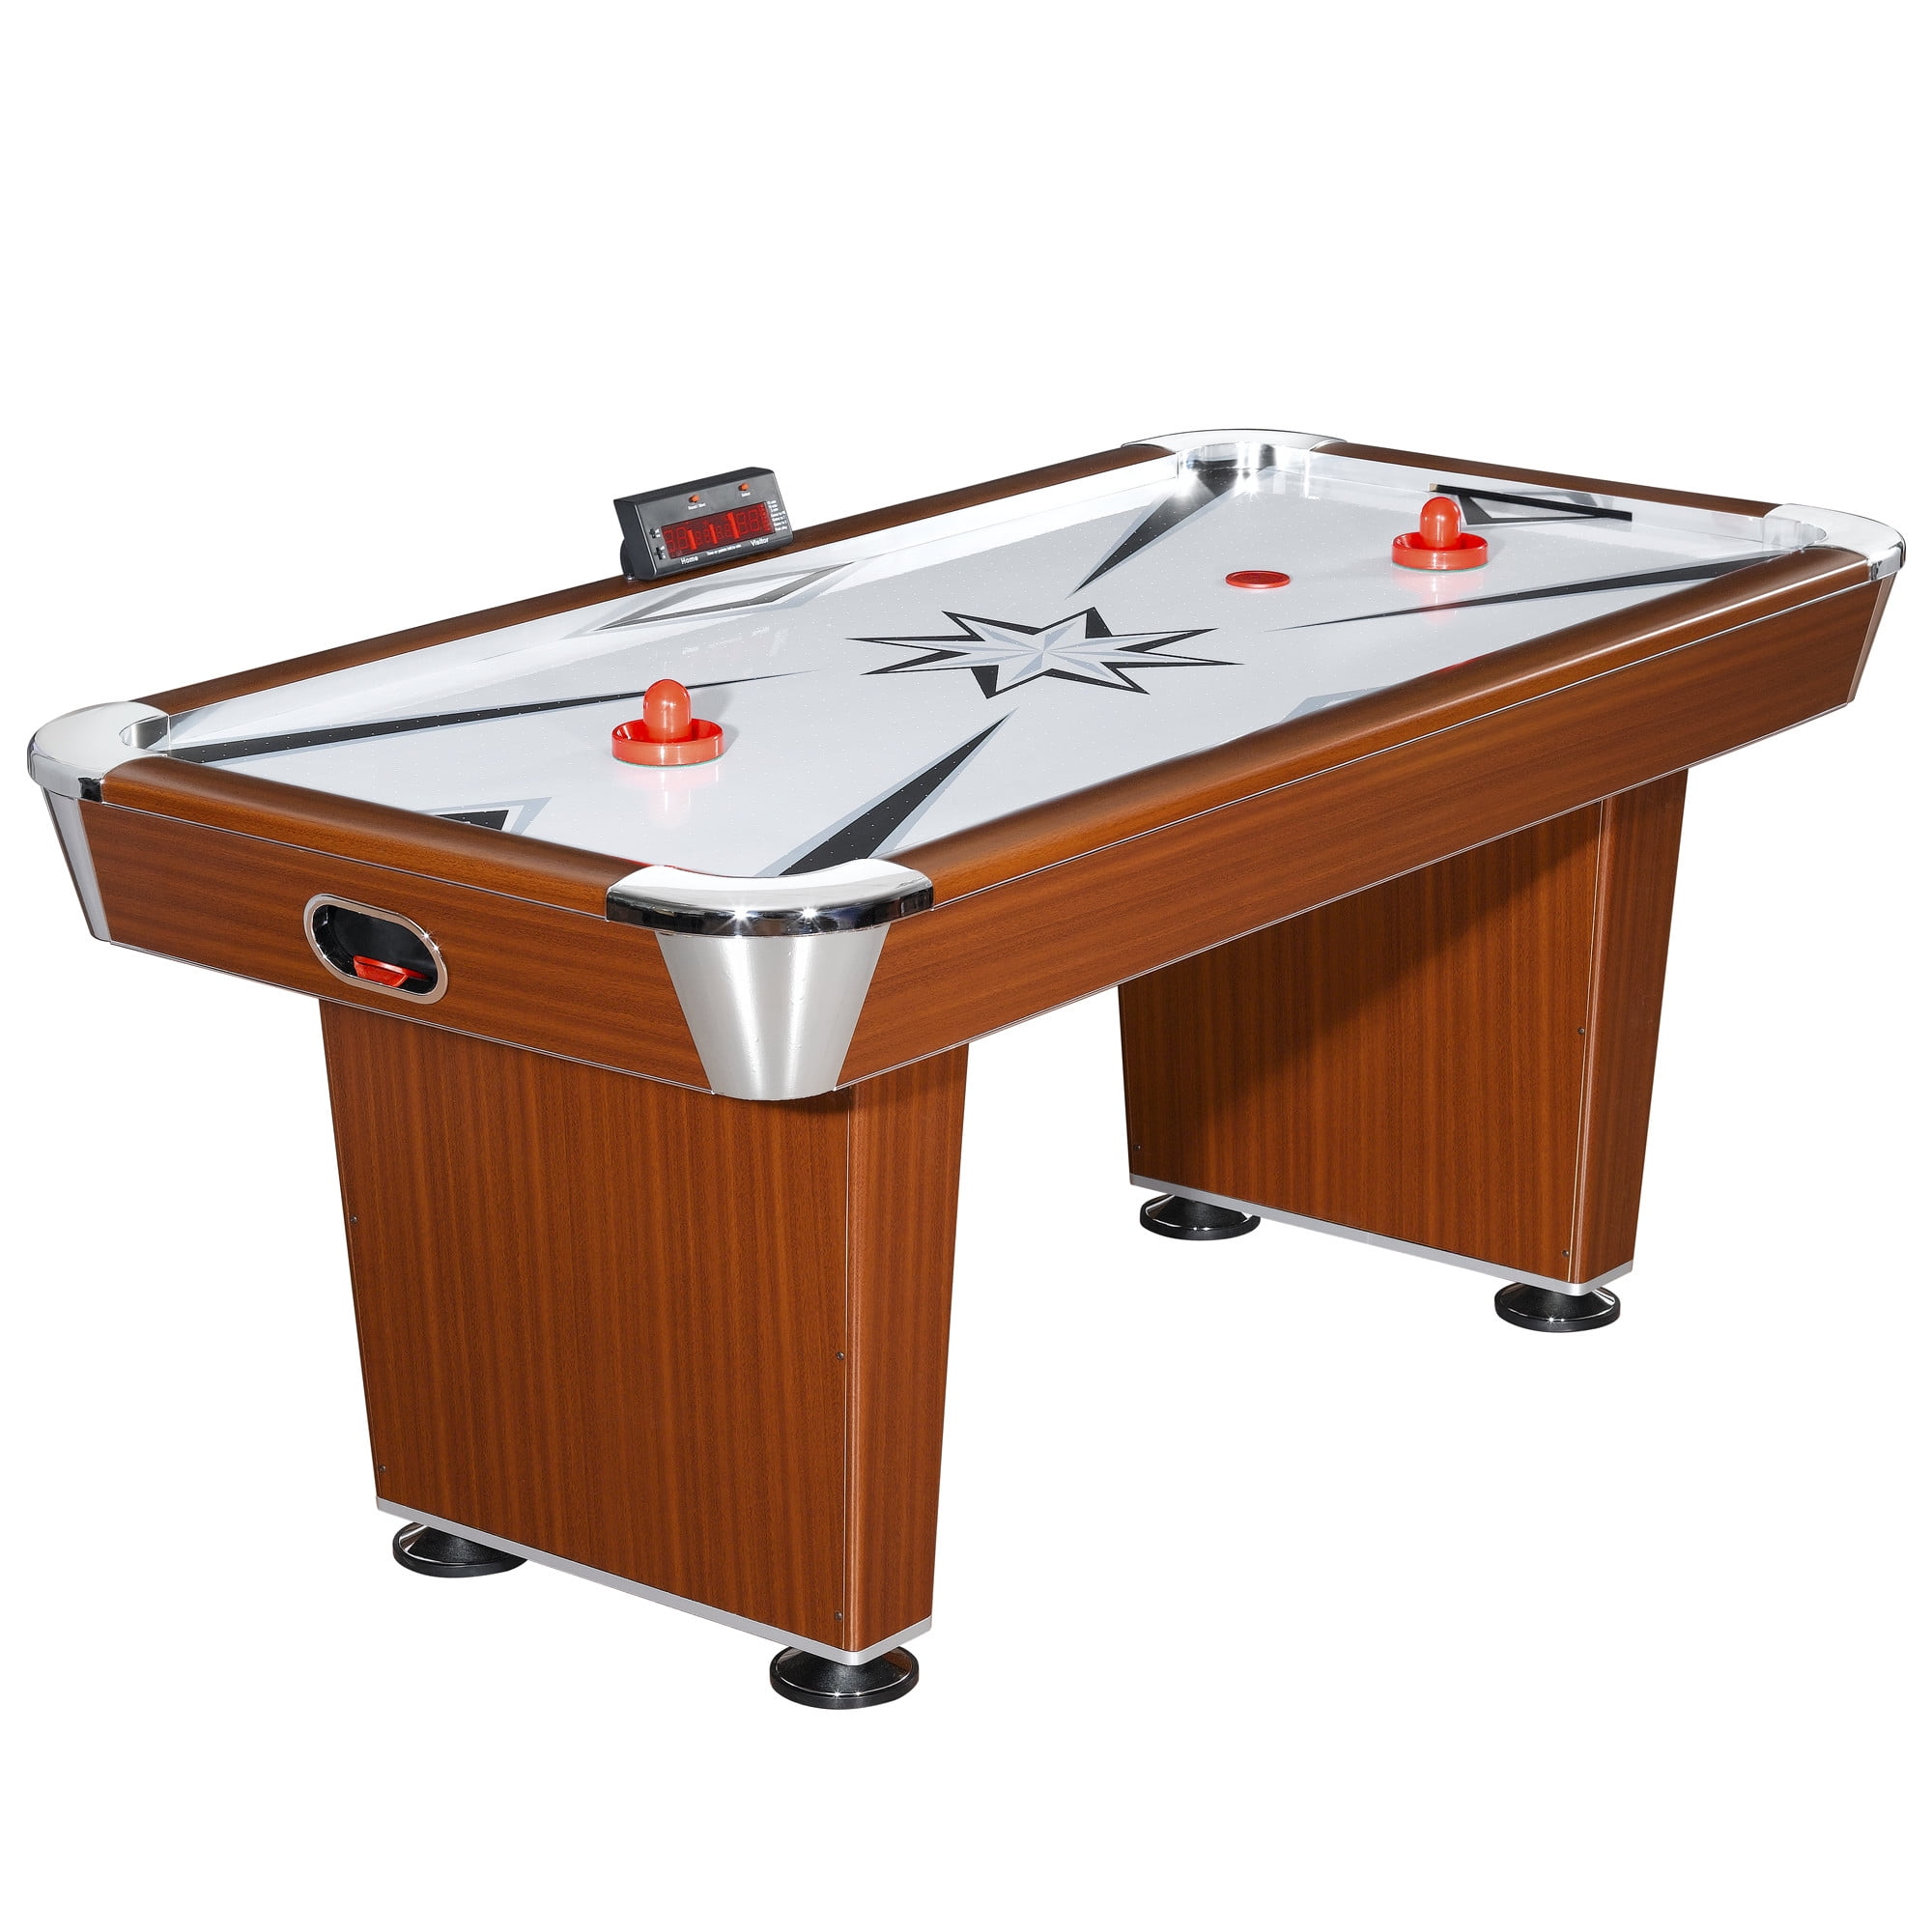 Hathaway Games 7' Universal Air Hockey Table Cover BG1039 for sale online 